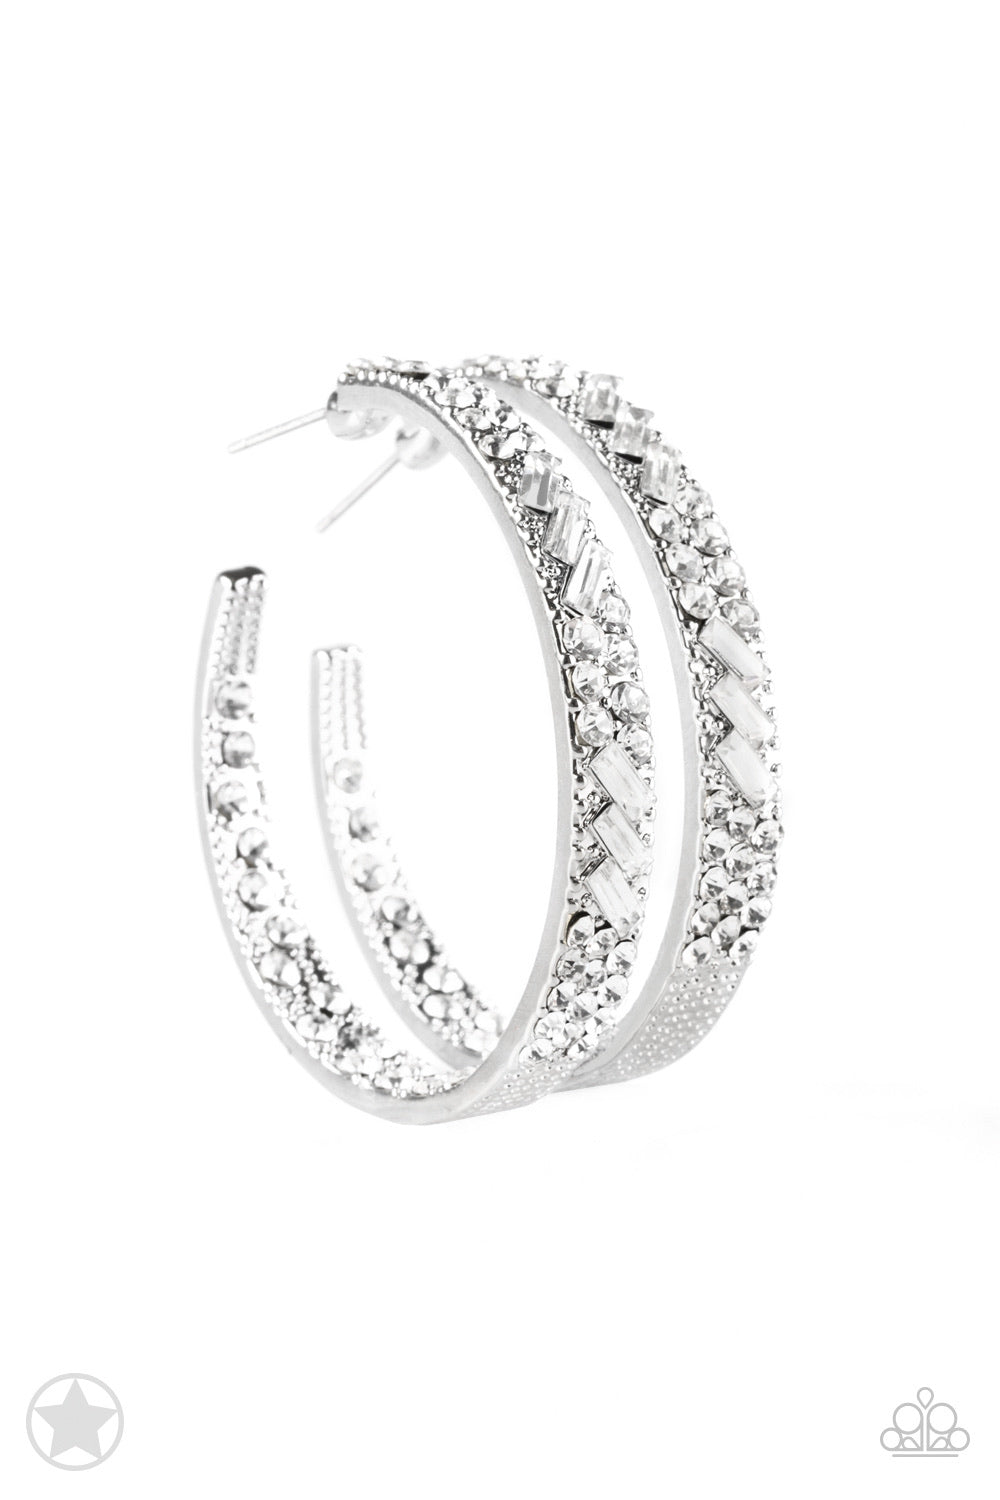 GLITZY By Association| Silver |Hoop Earrings| Sparkle and Shine with Missylee - Sparkle and Shine with Missy Lee